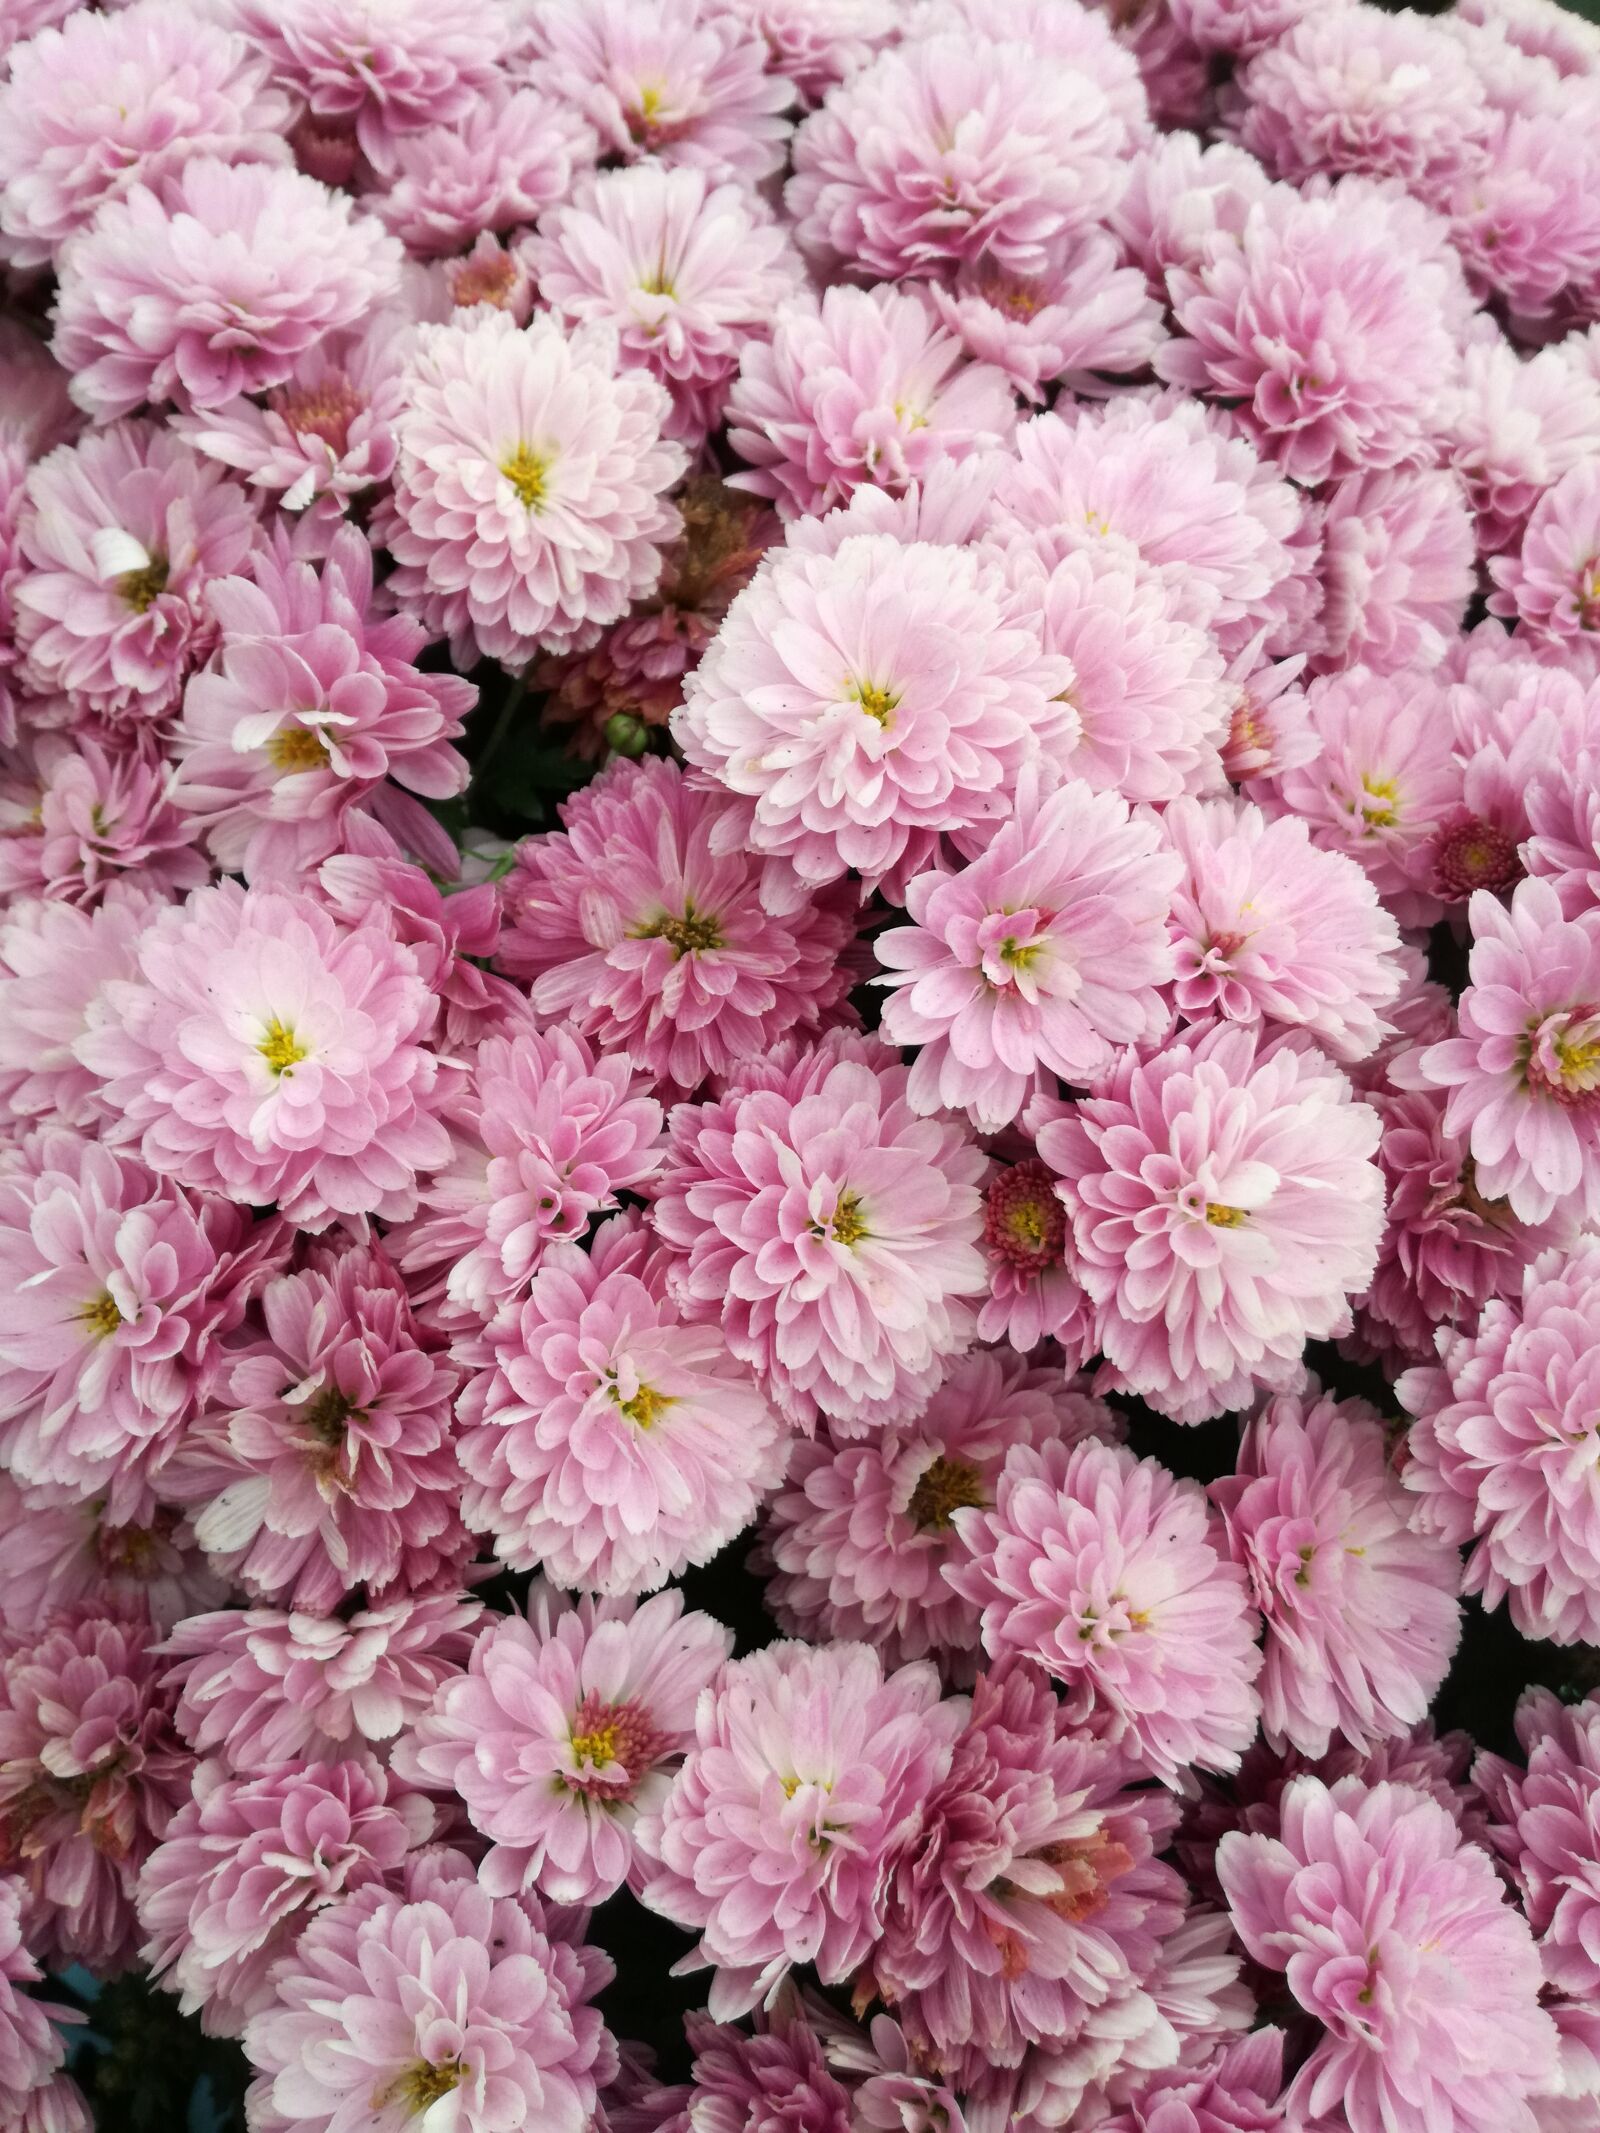 HUAWEI P9 LITE sample photo. Pink, pink flowers, pretty photography